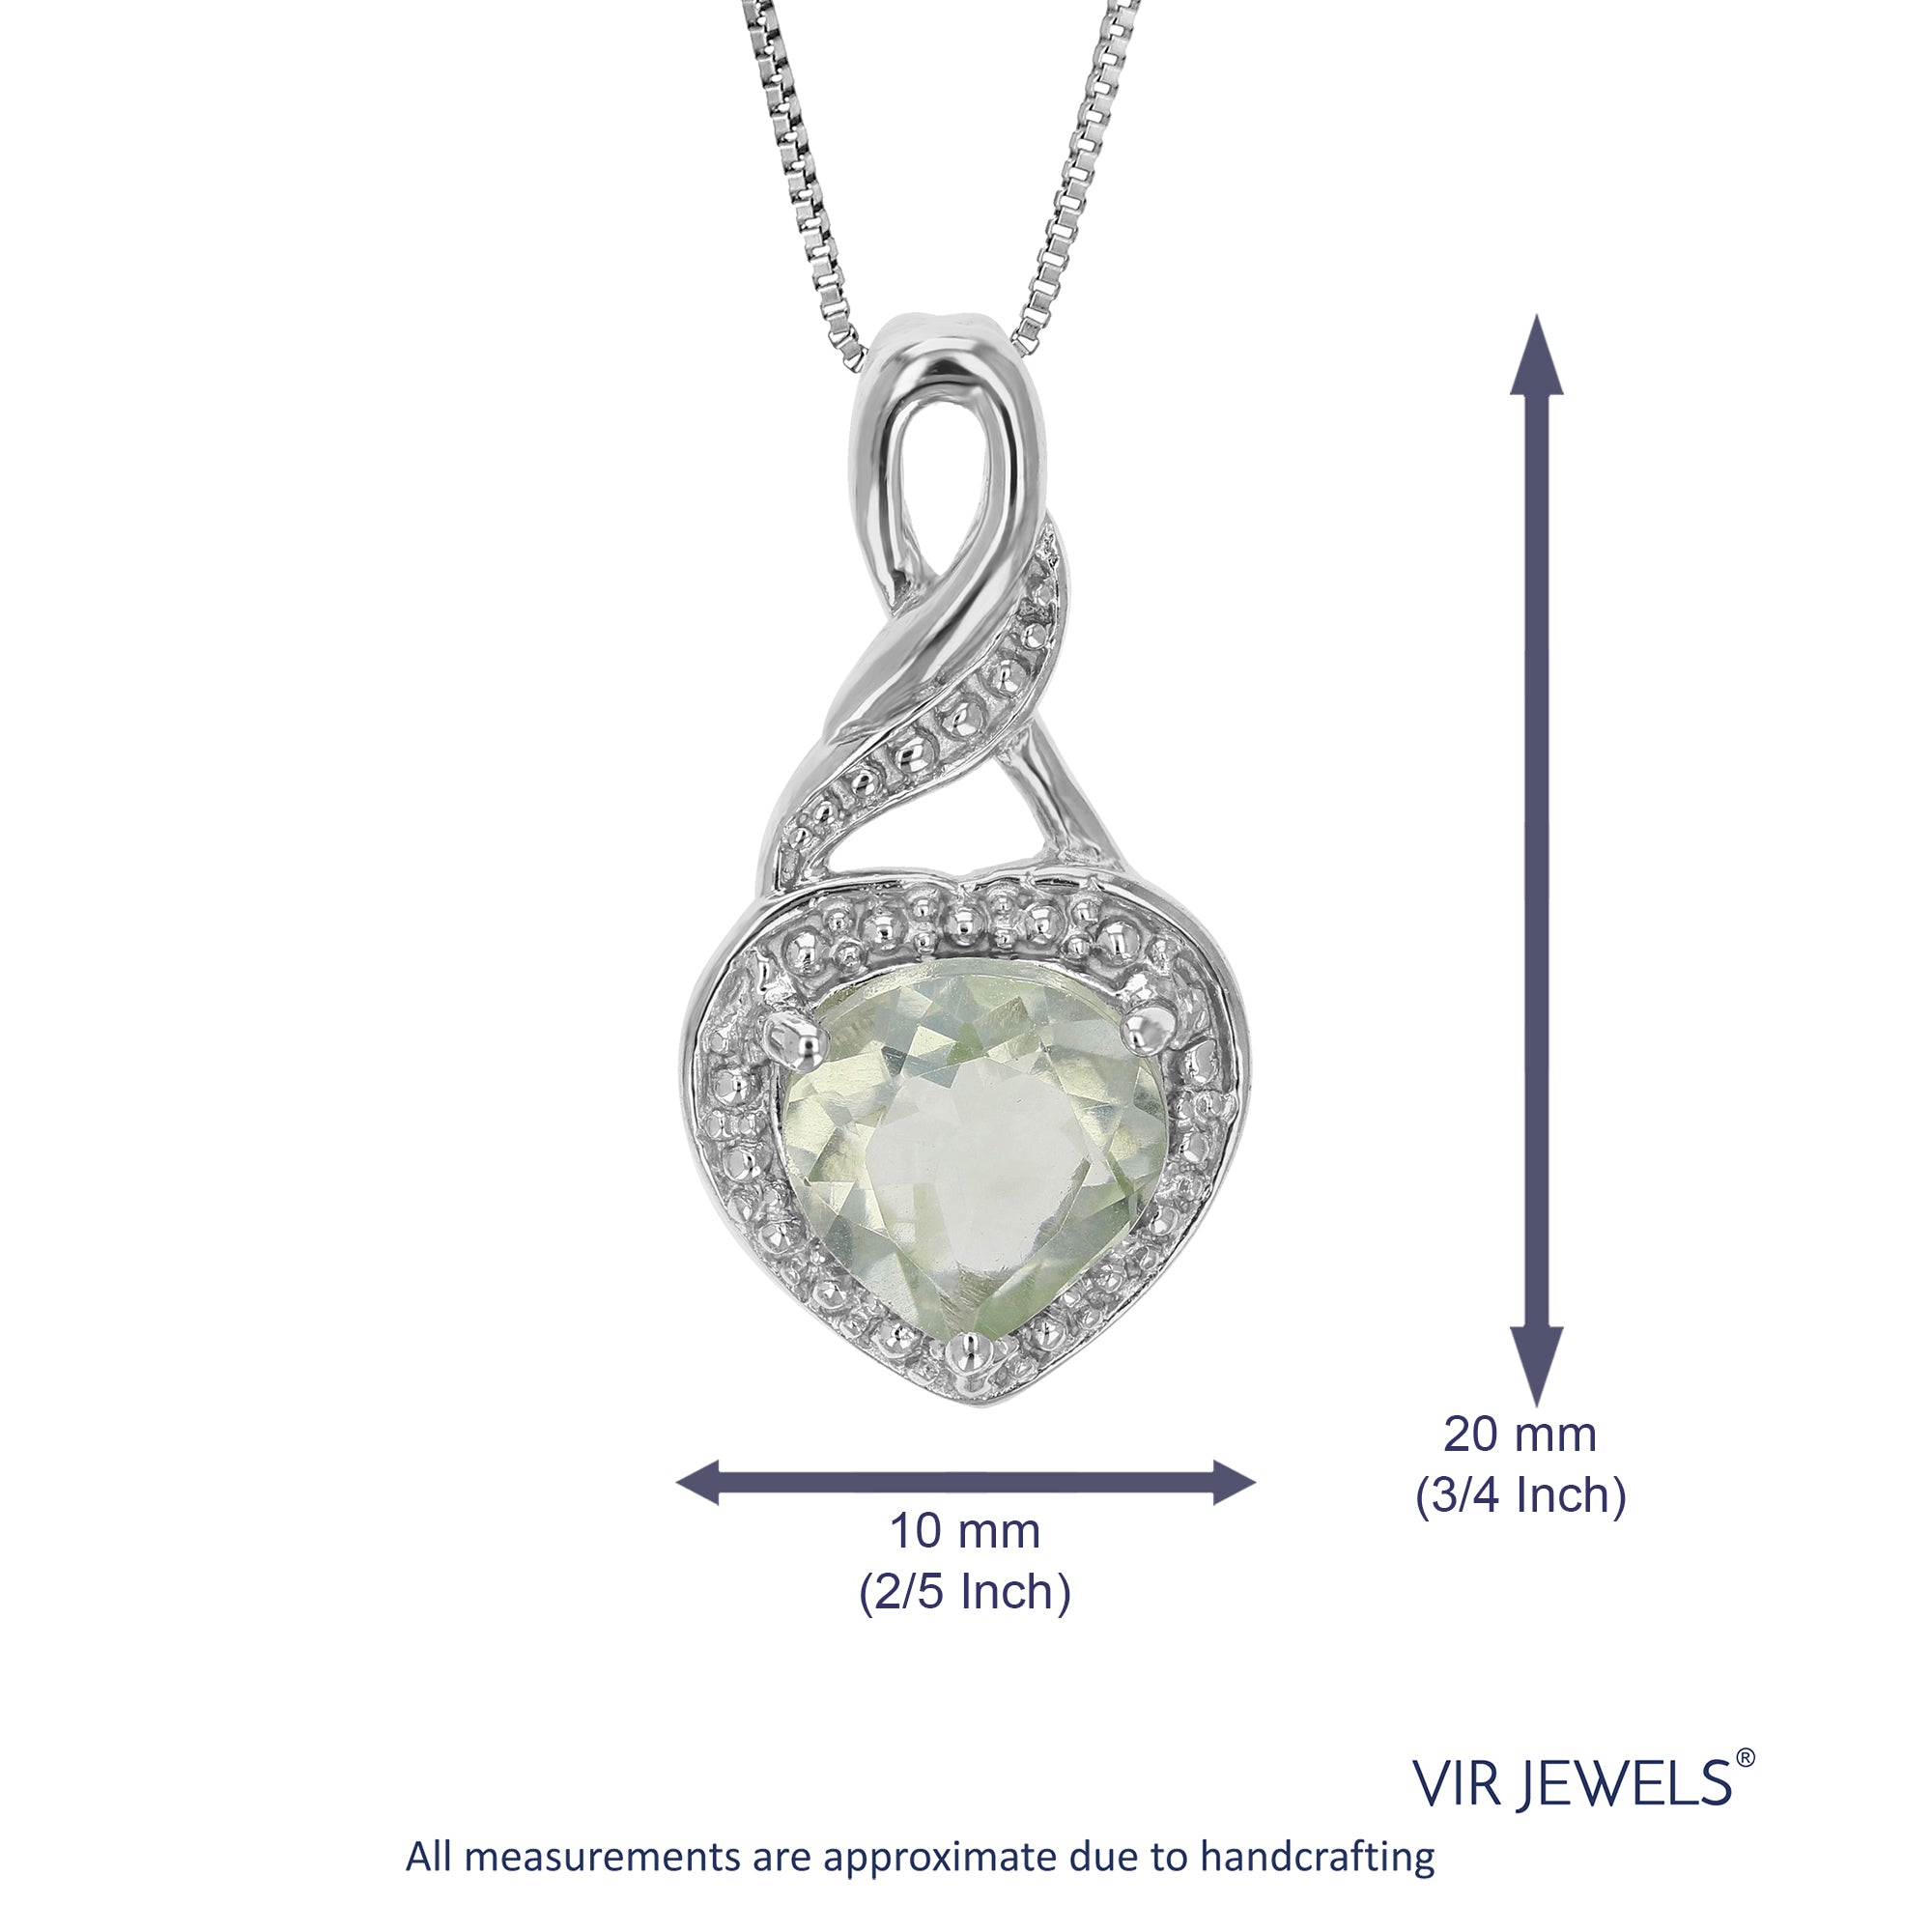 1 cttw Pendant Necklace, Green Amethyst Heart Pendant Necklace for Women in .925 Sterling Silver with Rhodium, 18 Inch Chain, Prong Setting